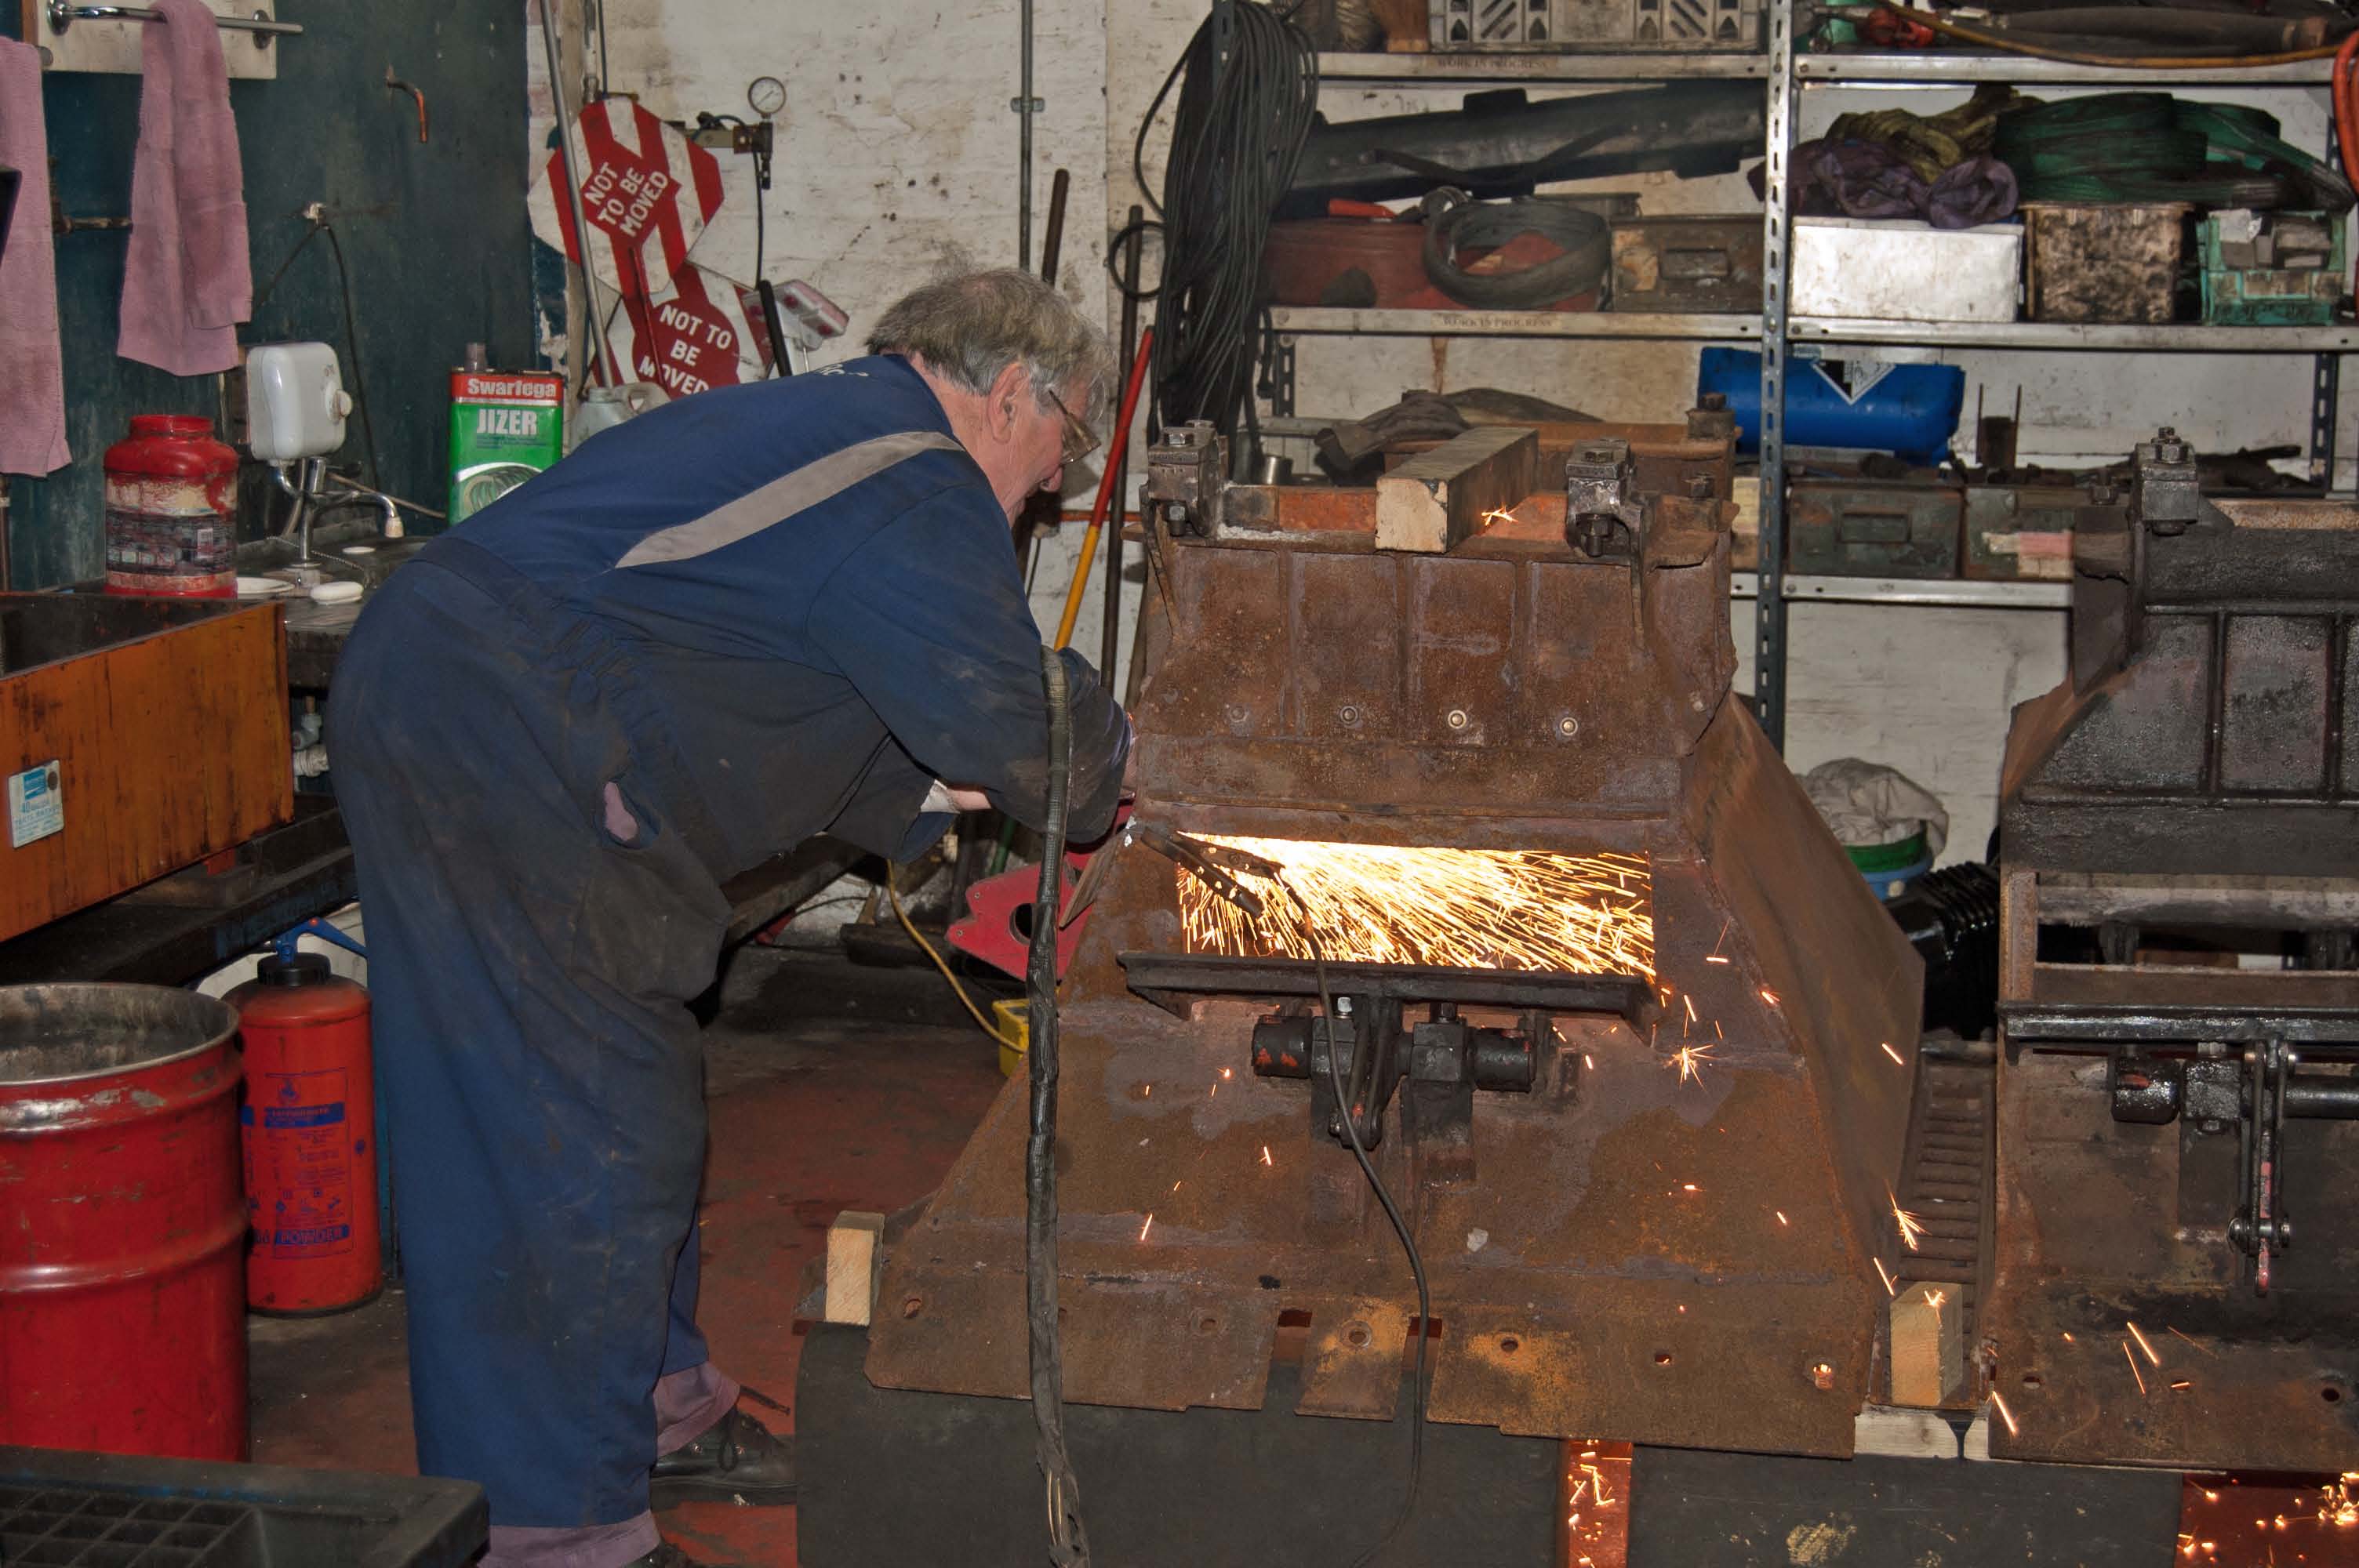 The plasma cutter is being used to remove damaged parts of the ashpans, so that they can be replaced or repaired.